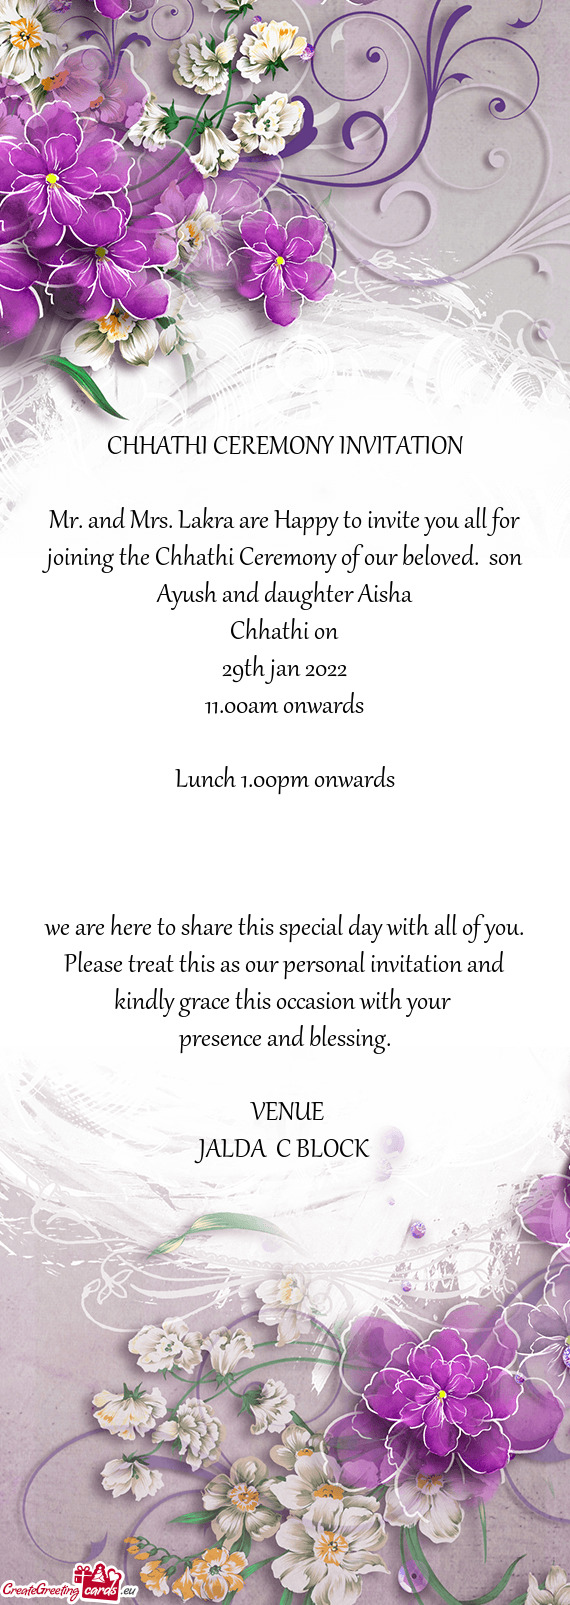 Mr. and Mrs. Lakra are Happy to invite you all for joining the Chhathi Ceremony of our beloved. son